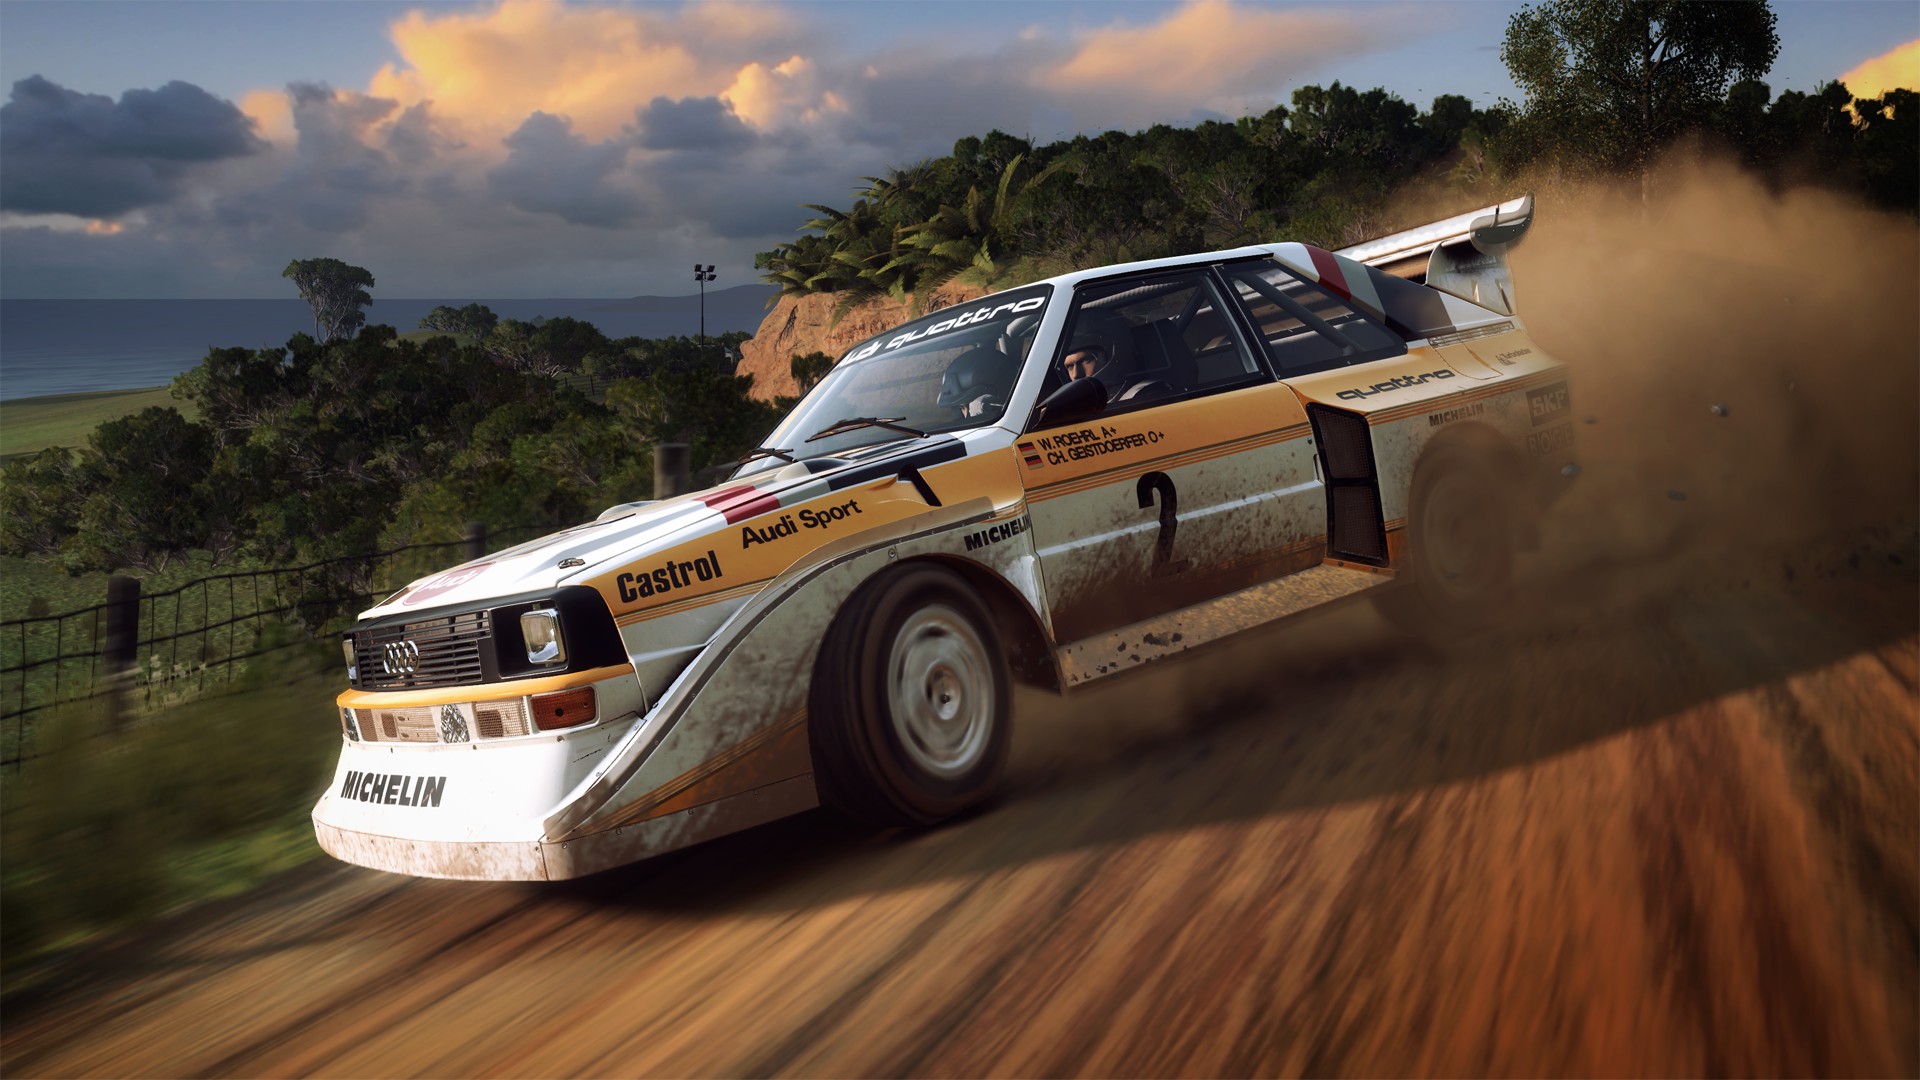 DiRT Rally 2.0 Day One Edition